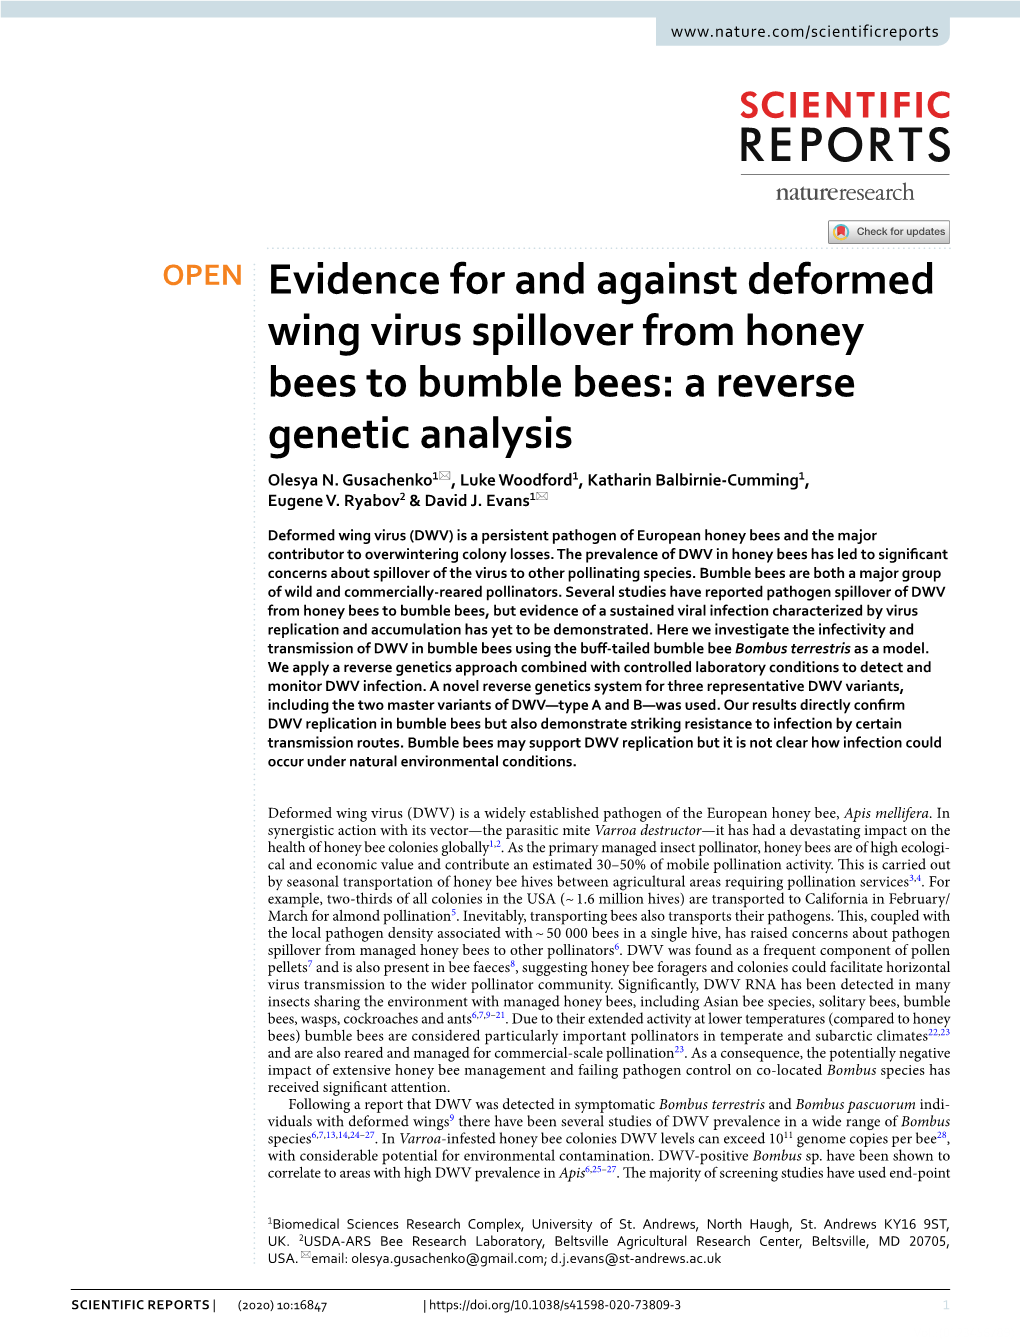 Evidence for and Against Deformed Wing Virus Spillover from Honey Bees to Bumble Bees: a Reverse Genetic Analysis Olesya N